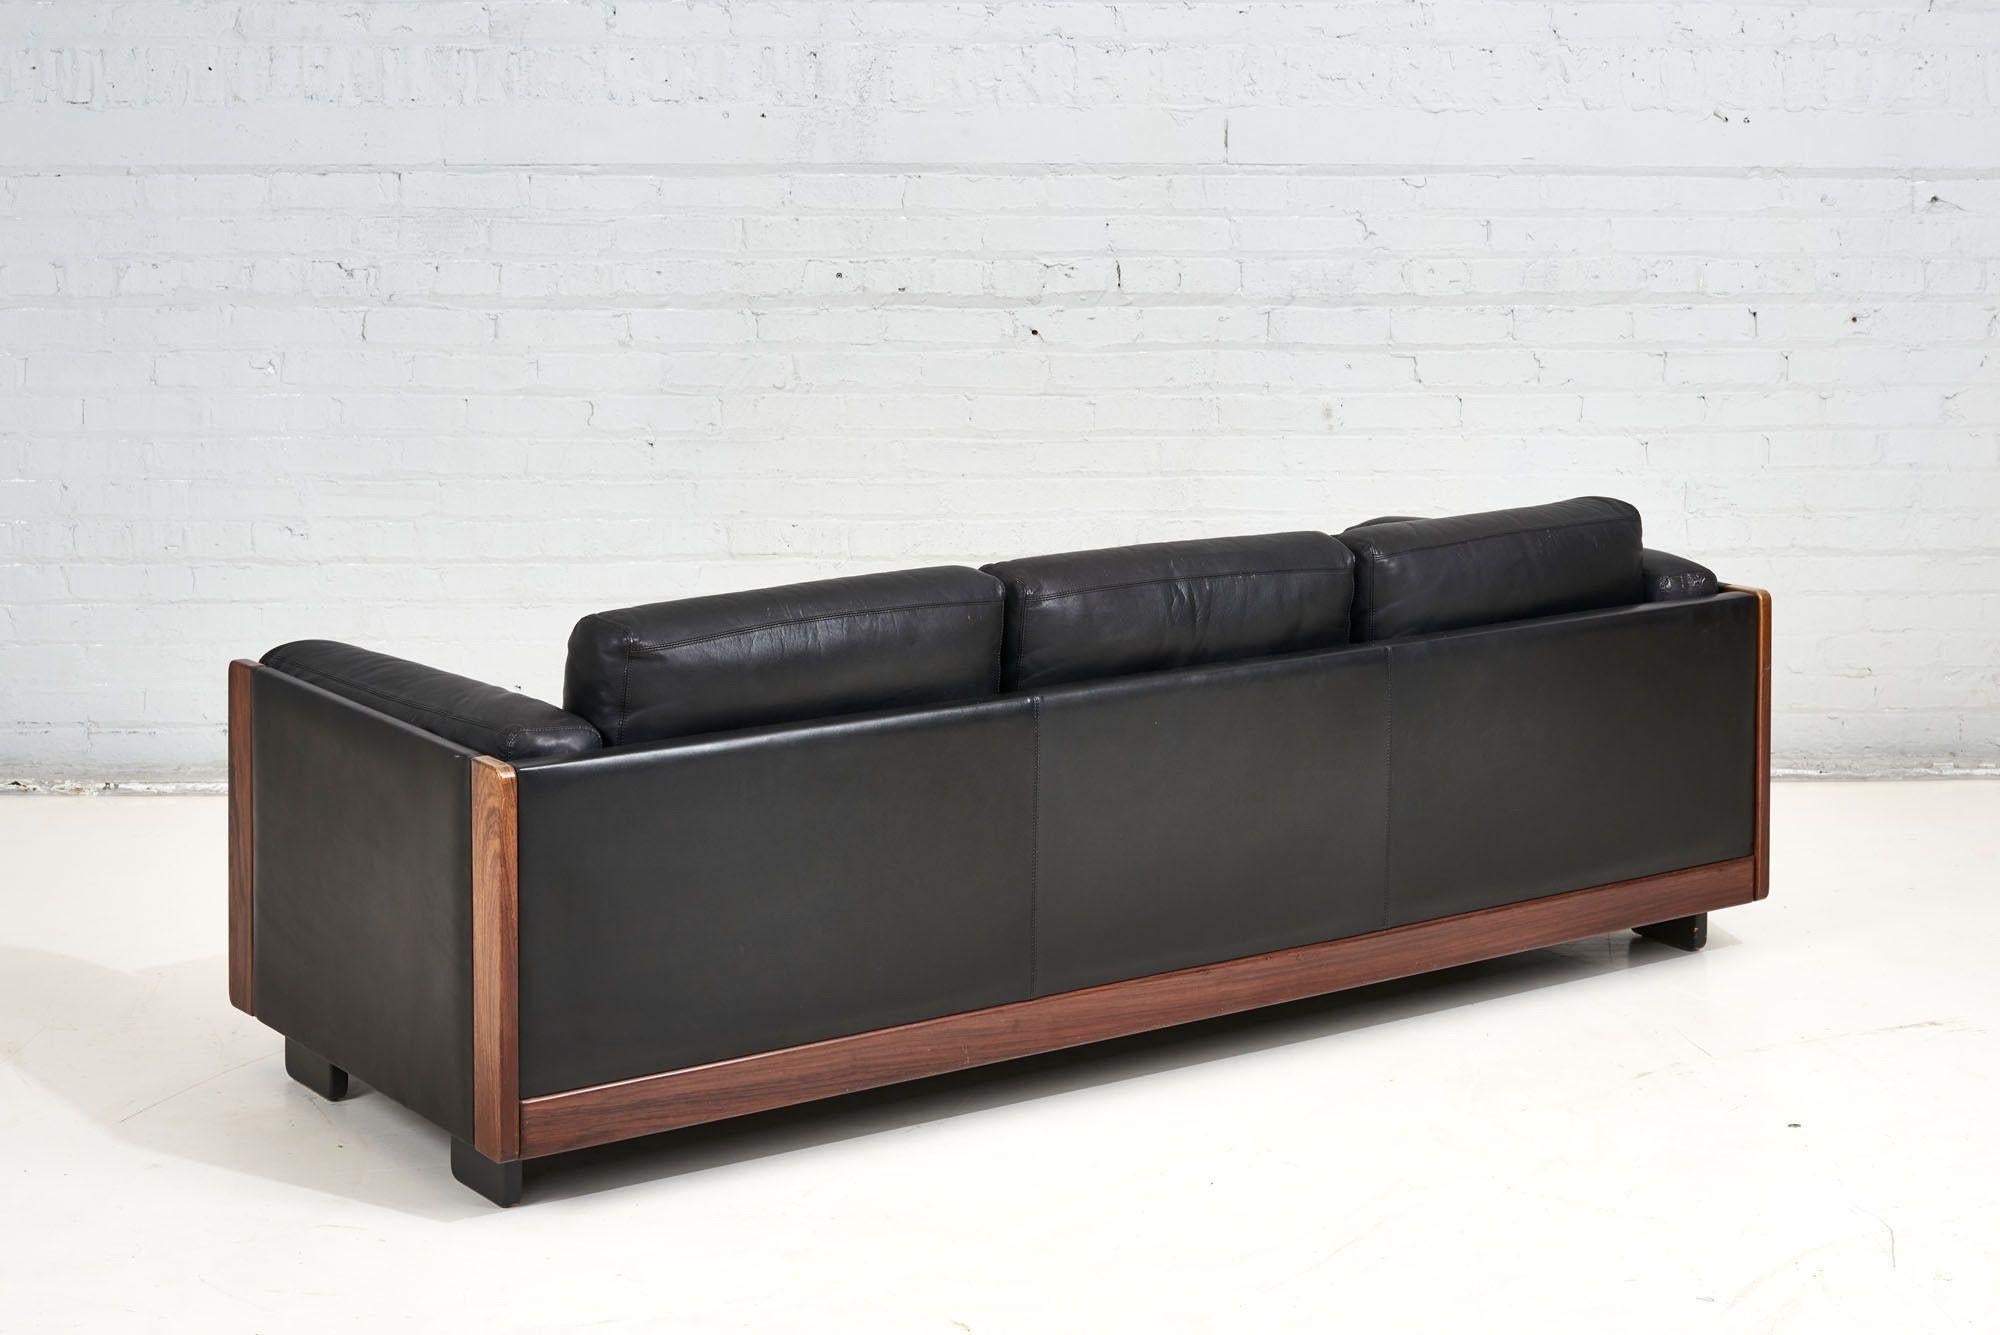 Black Leathe/Rosewood “920 Sofa”, Afra & Tobia Scarpa for Cassina, Italy 1960 In Good Condition For Sale In Chicago, IL